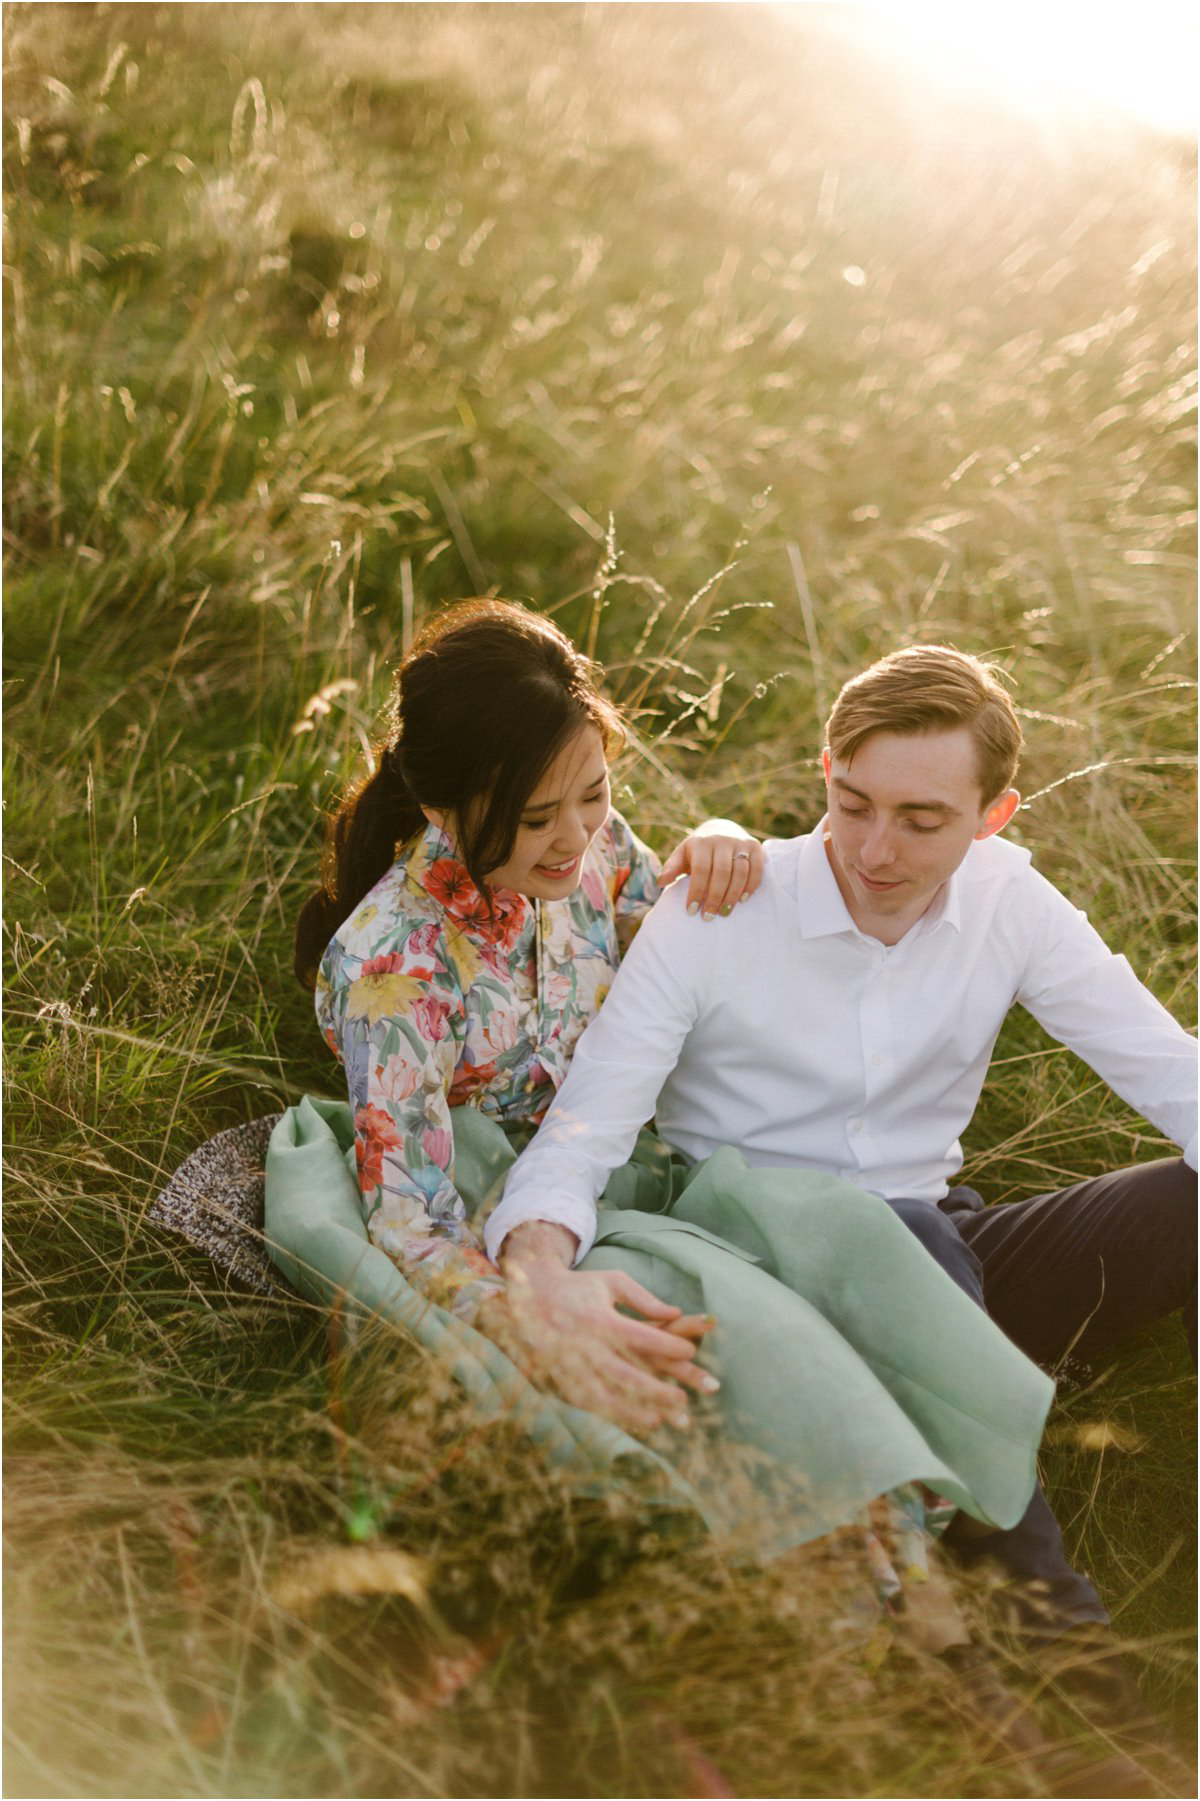  Korean girl and British boy sitting in tall grass holding hands in a sunset 